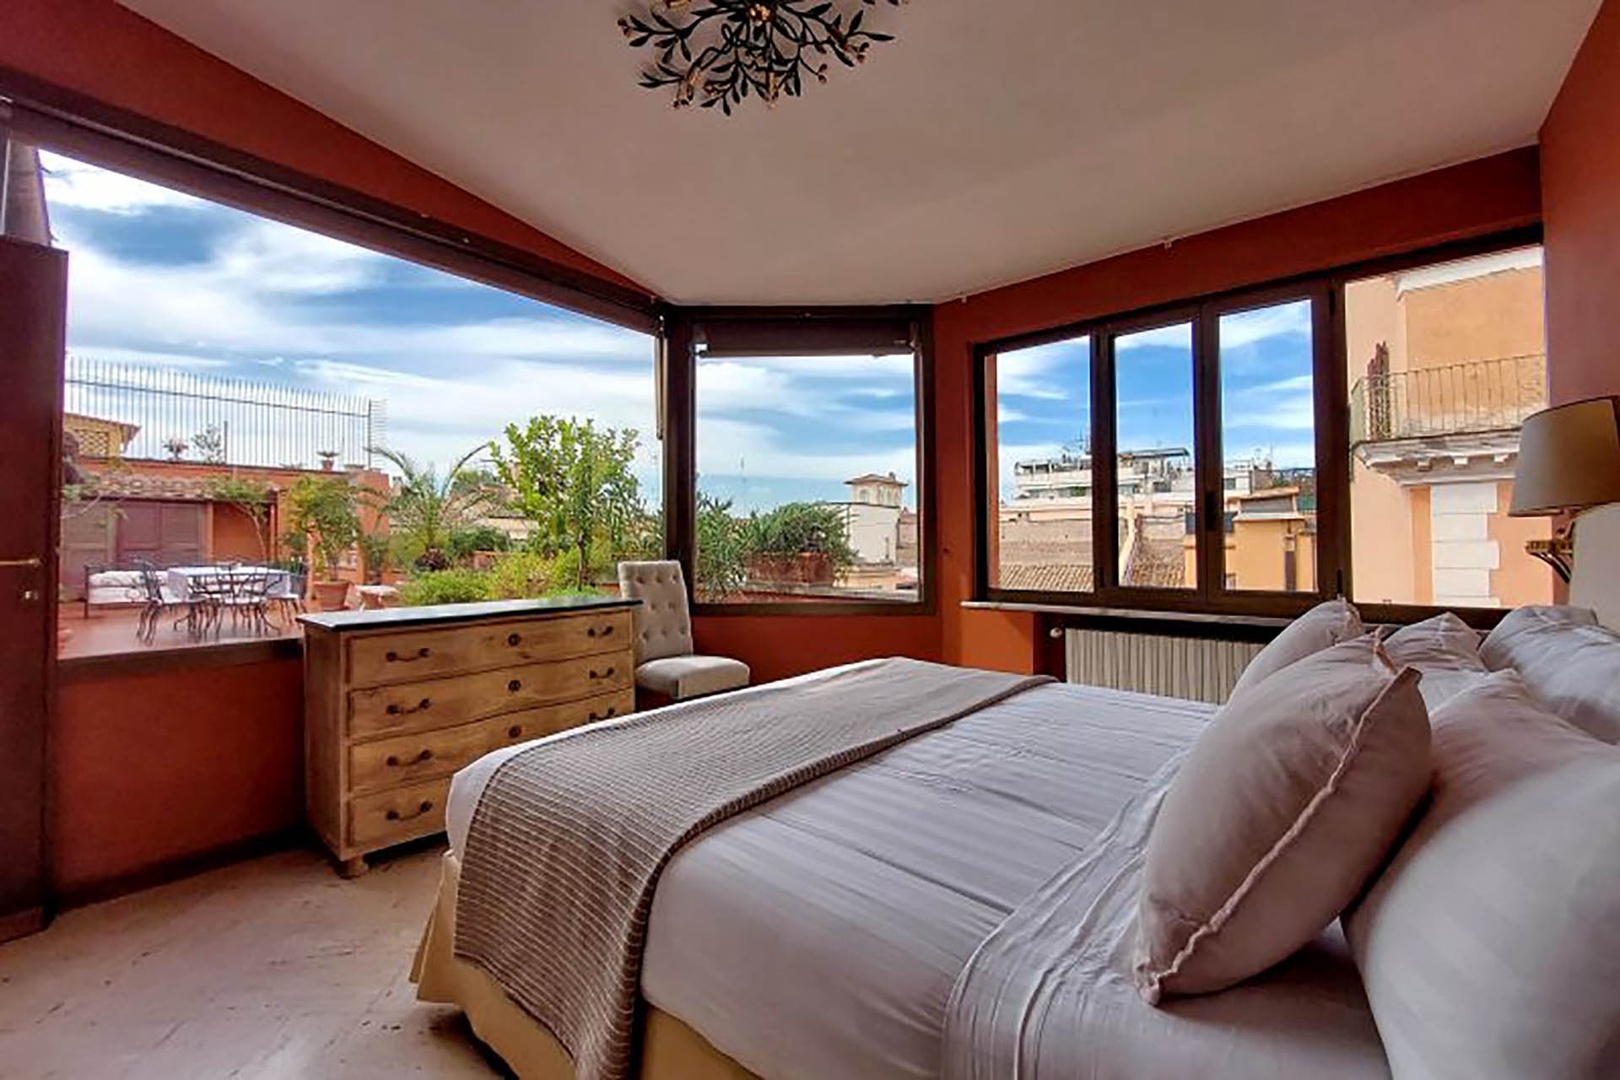 Amazing bedroom 1 with lots of light and magical views.